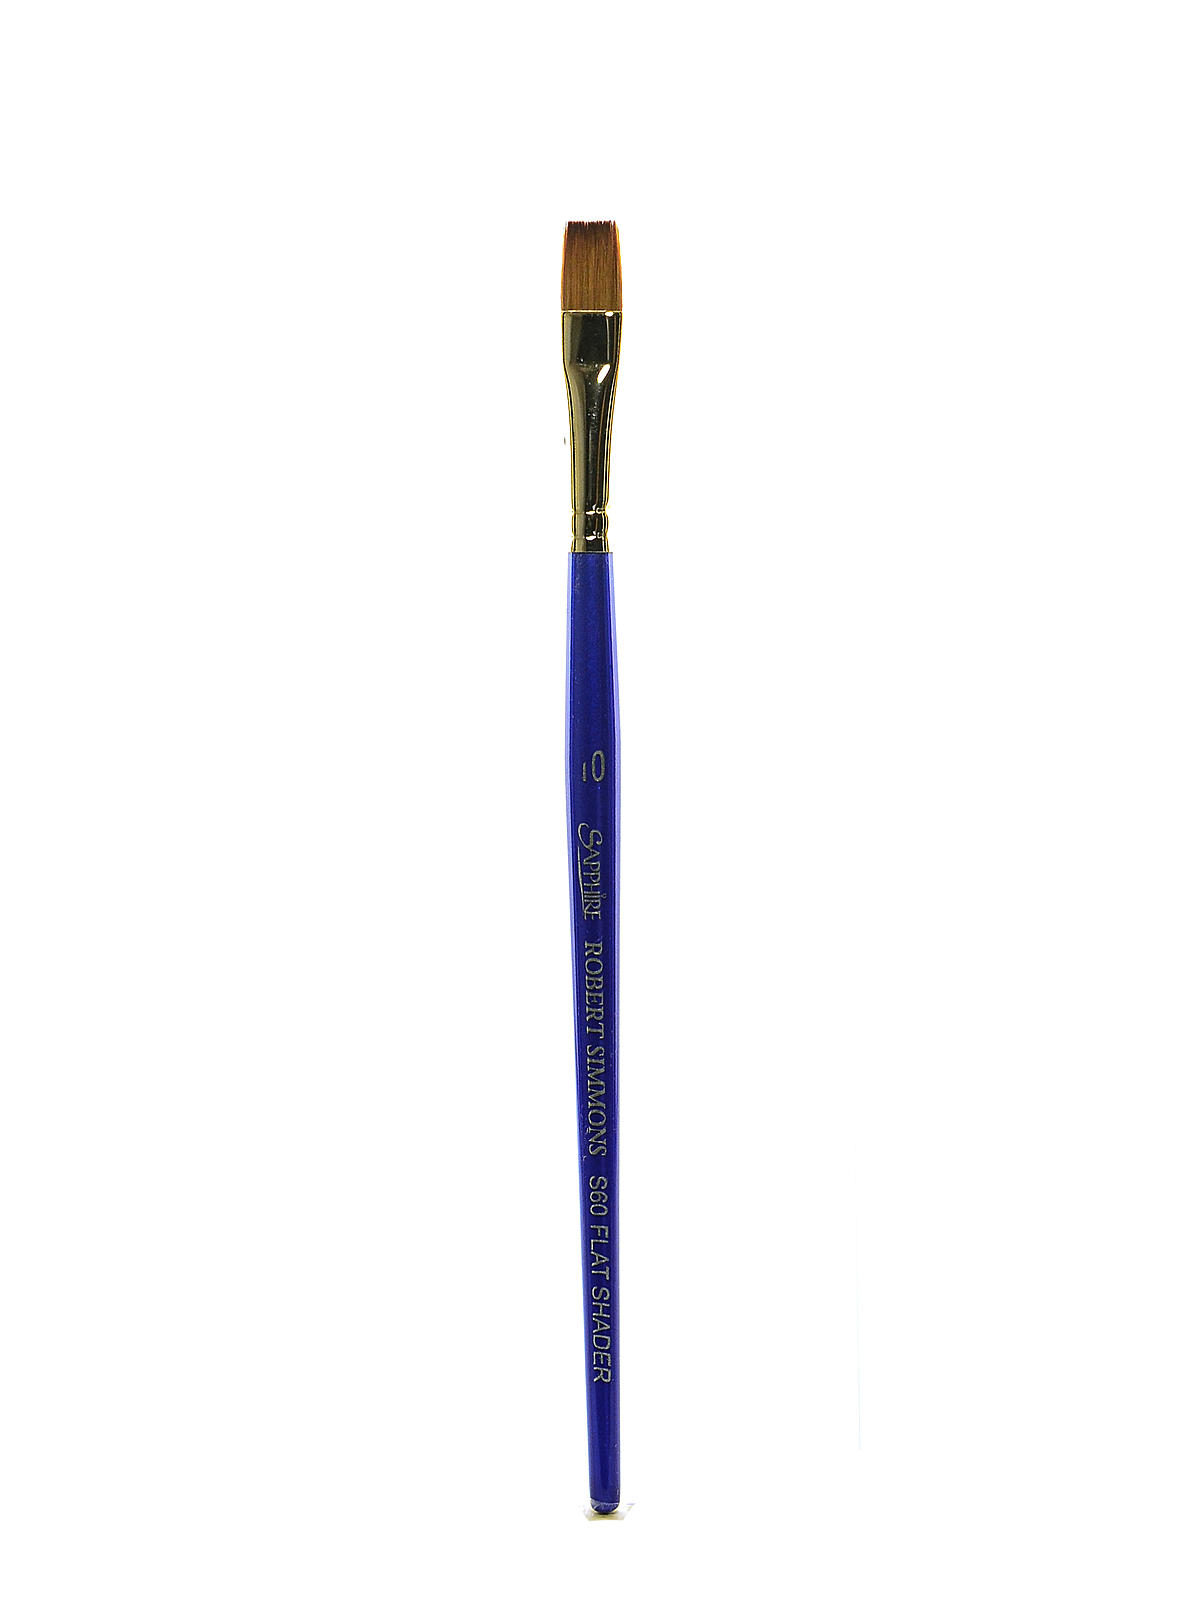 Sapphire Series Synthetic Brushes Short Handle 10 Shader S60